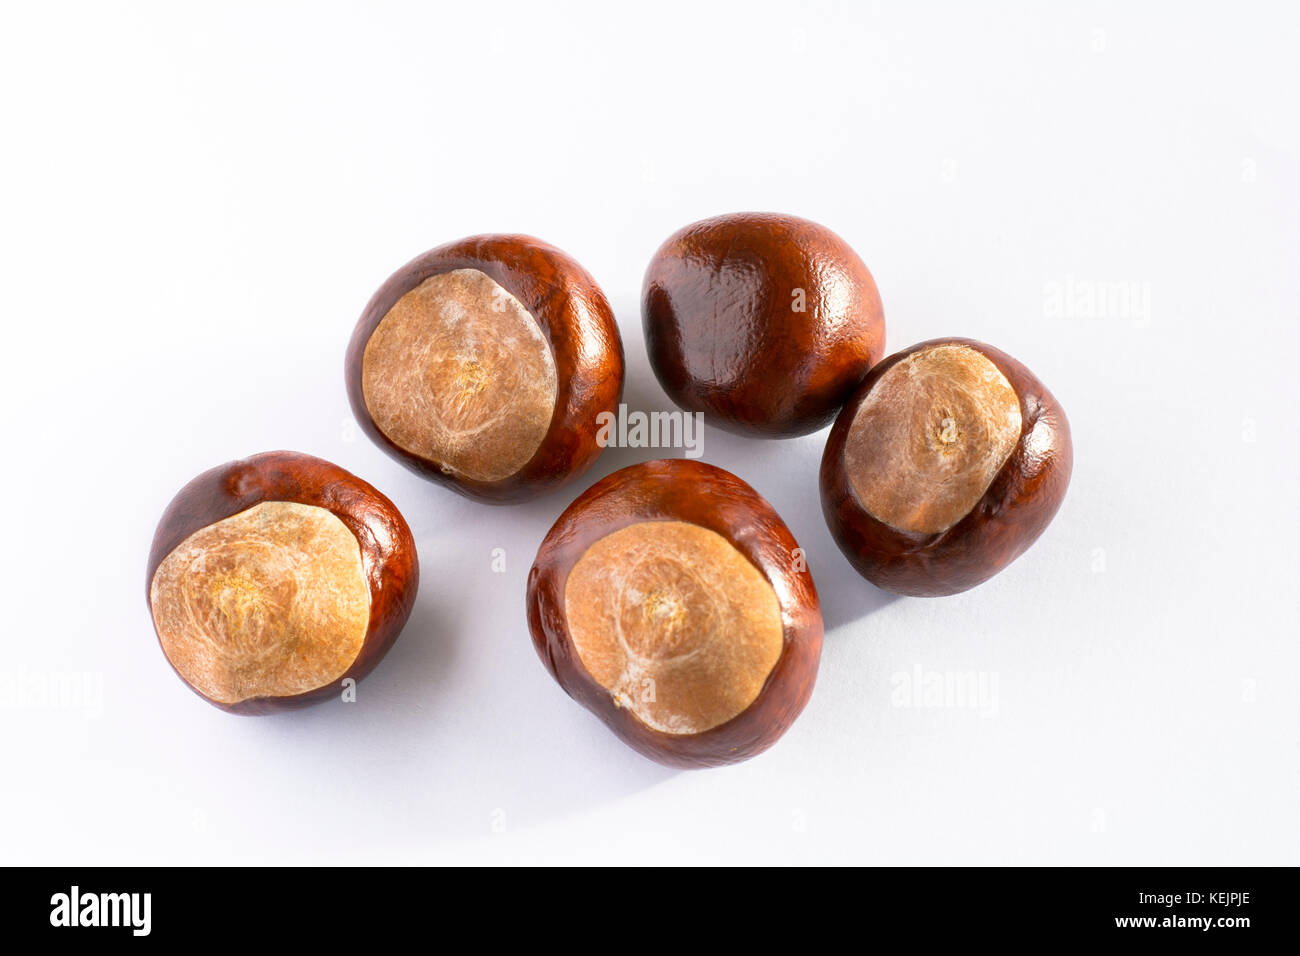 Five brand new, clean and shiny horse chestnuts fresh out of the husk. Stock Photo